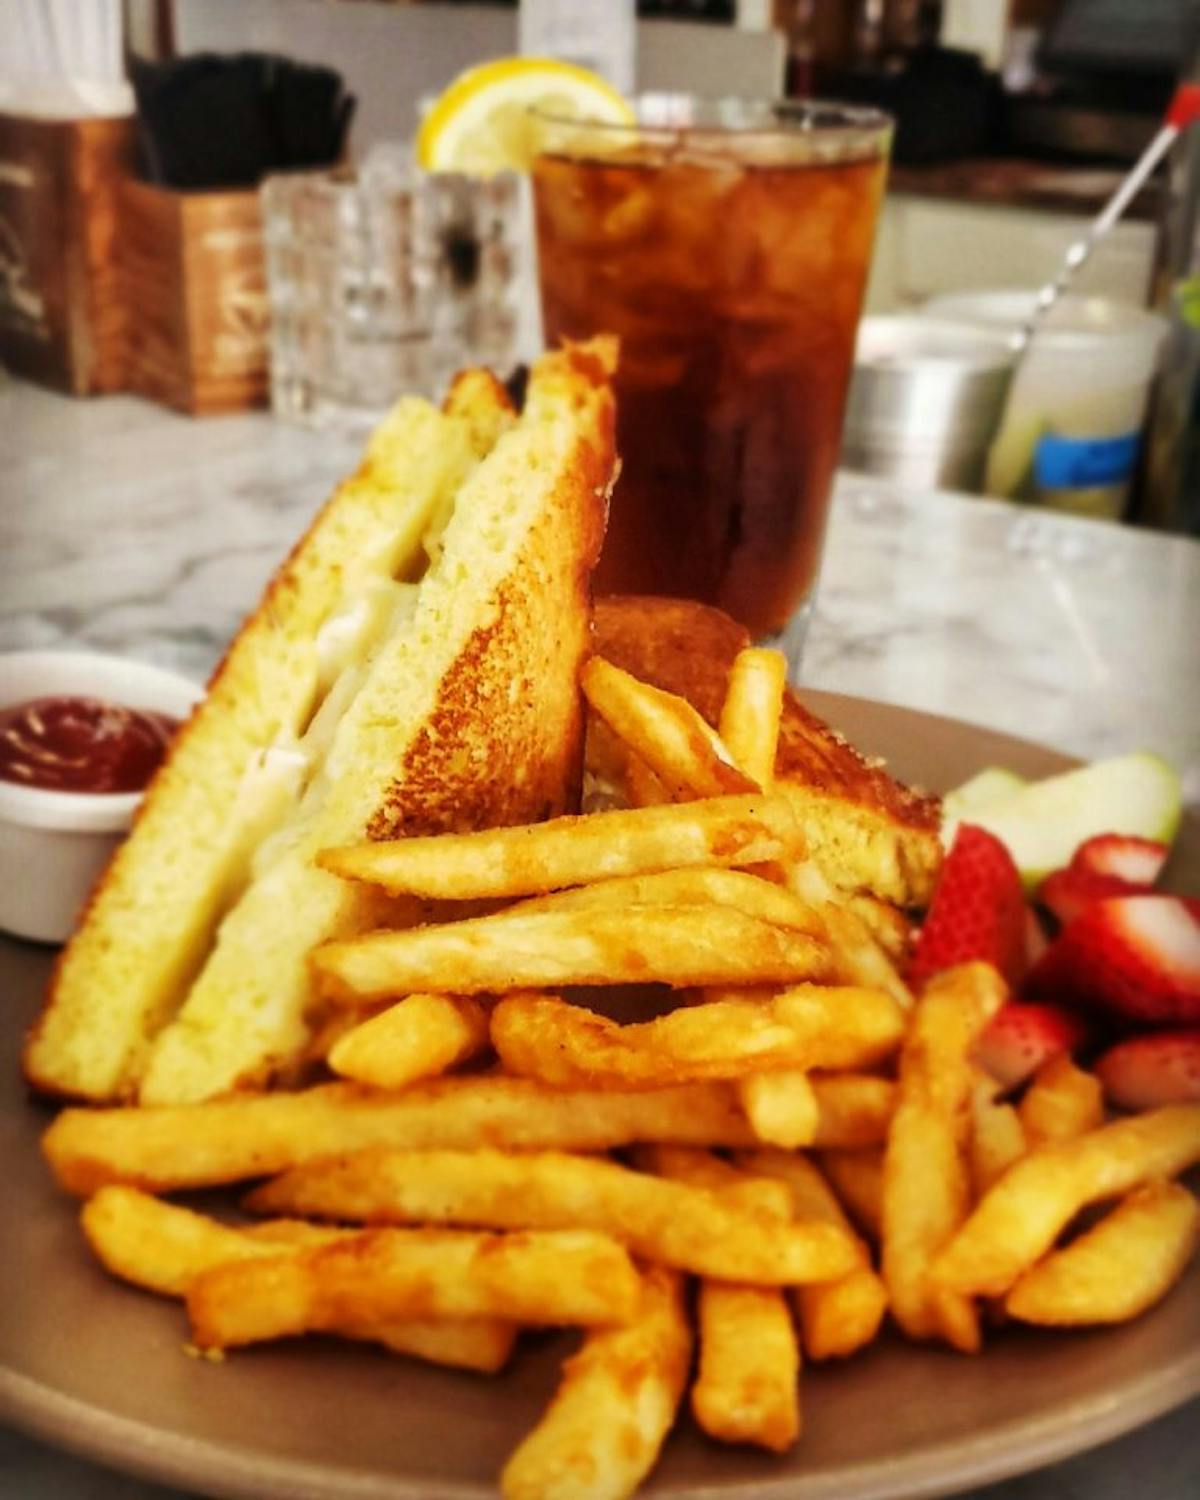 A sandwich and french fries.